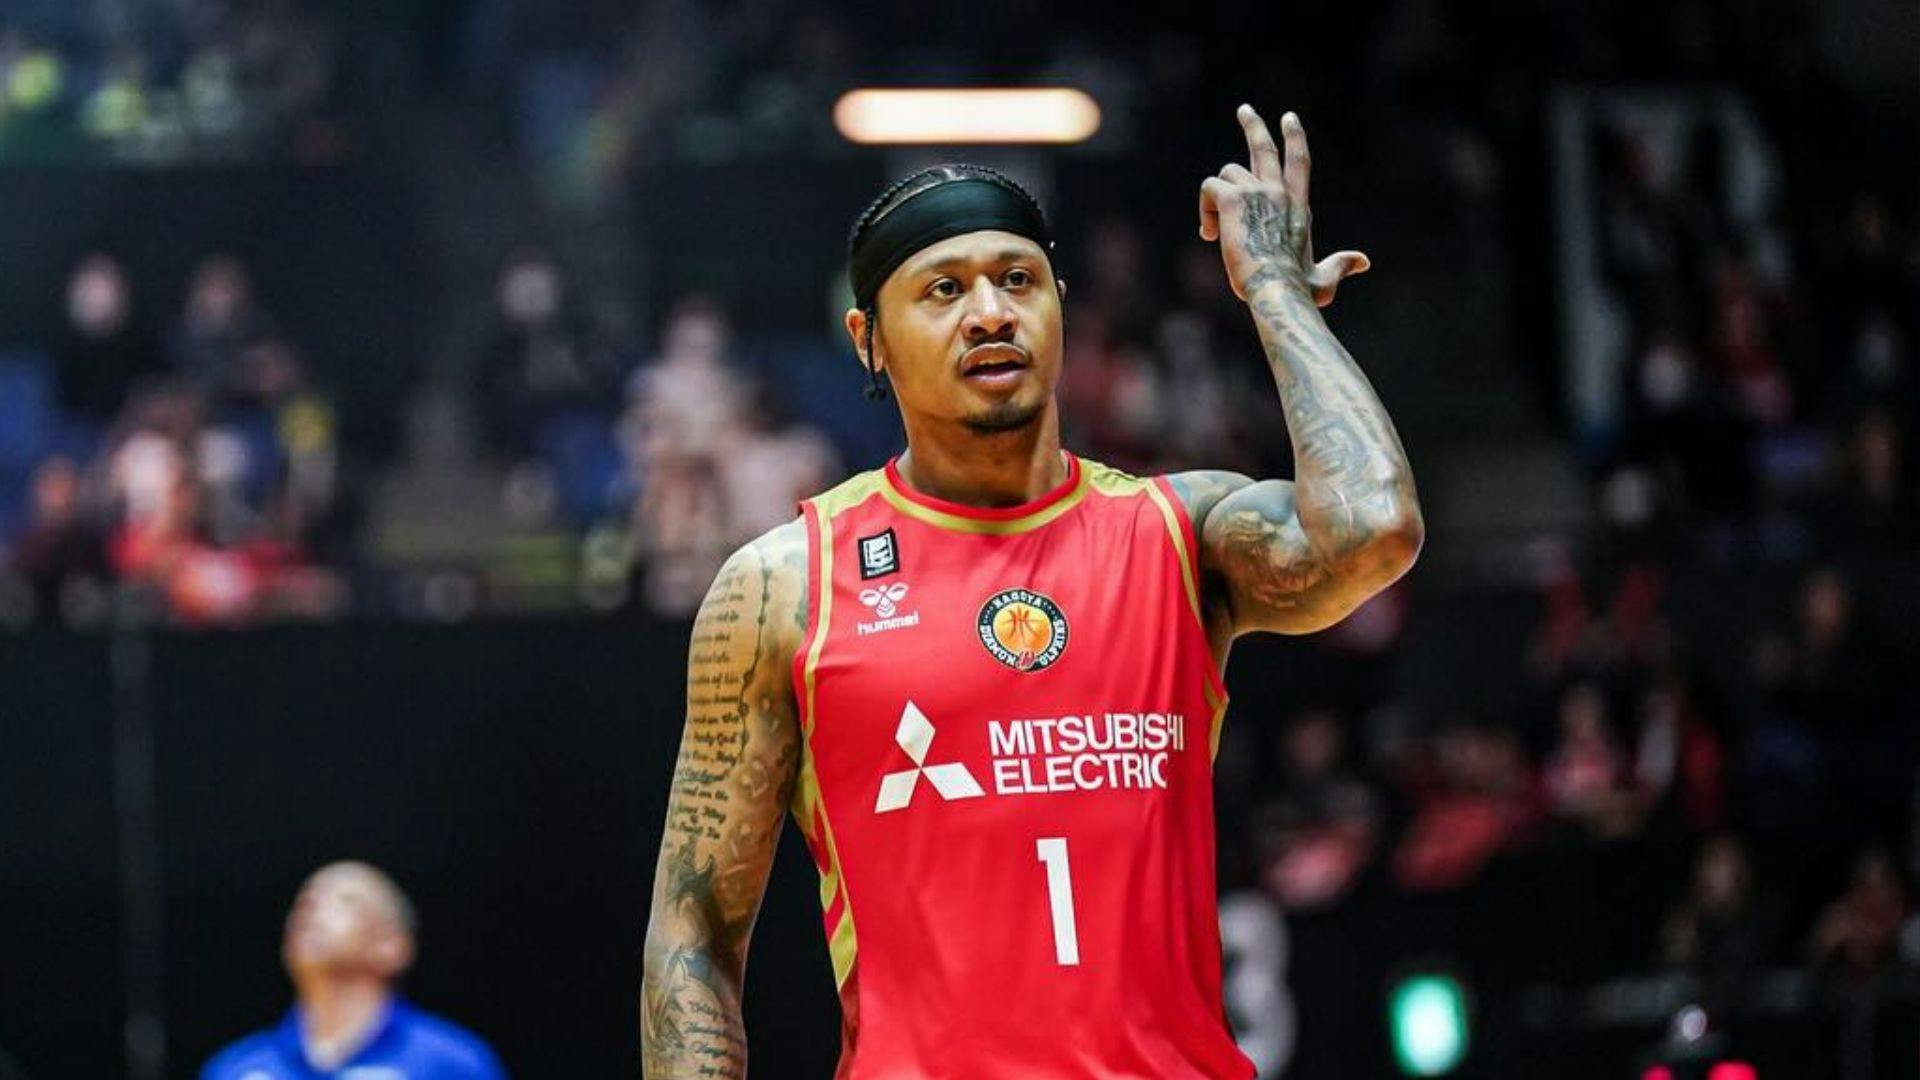 B.League: Ray Parks Jr. bids farewell to Nagoya, says Dolphins 